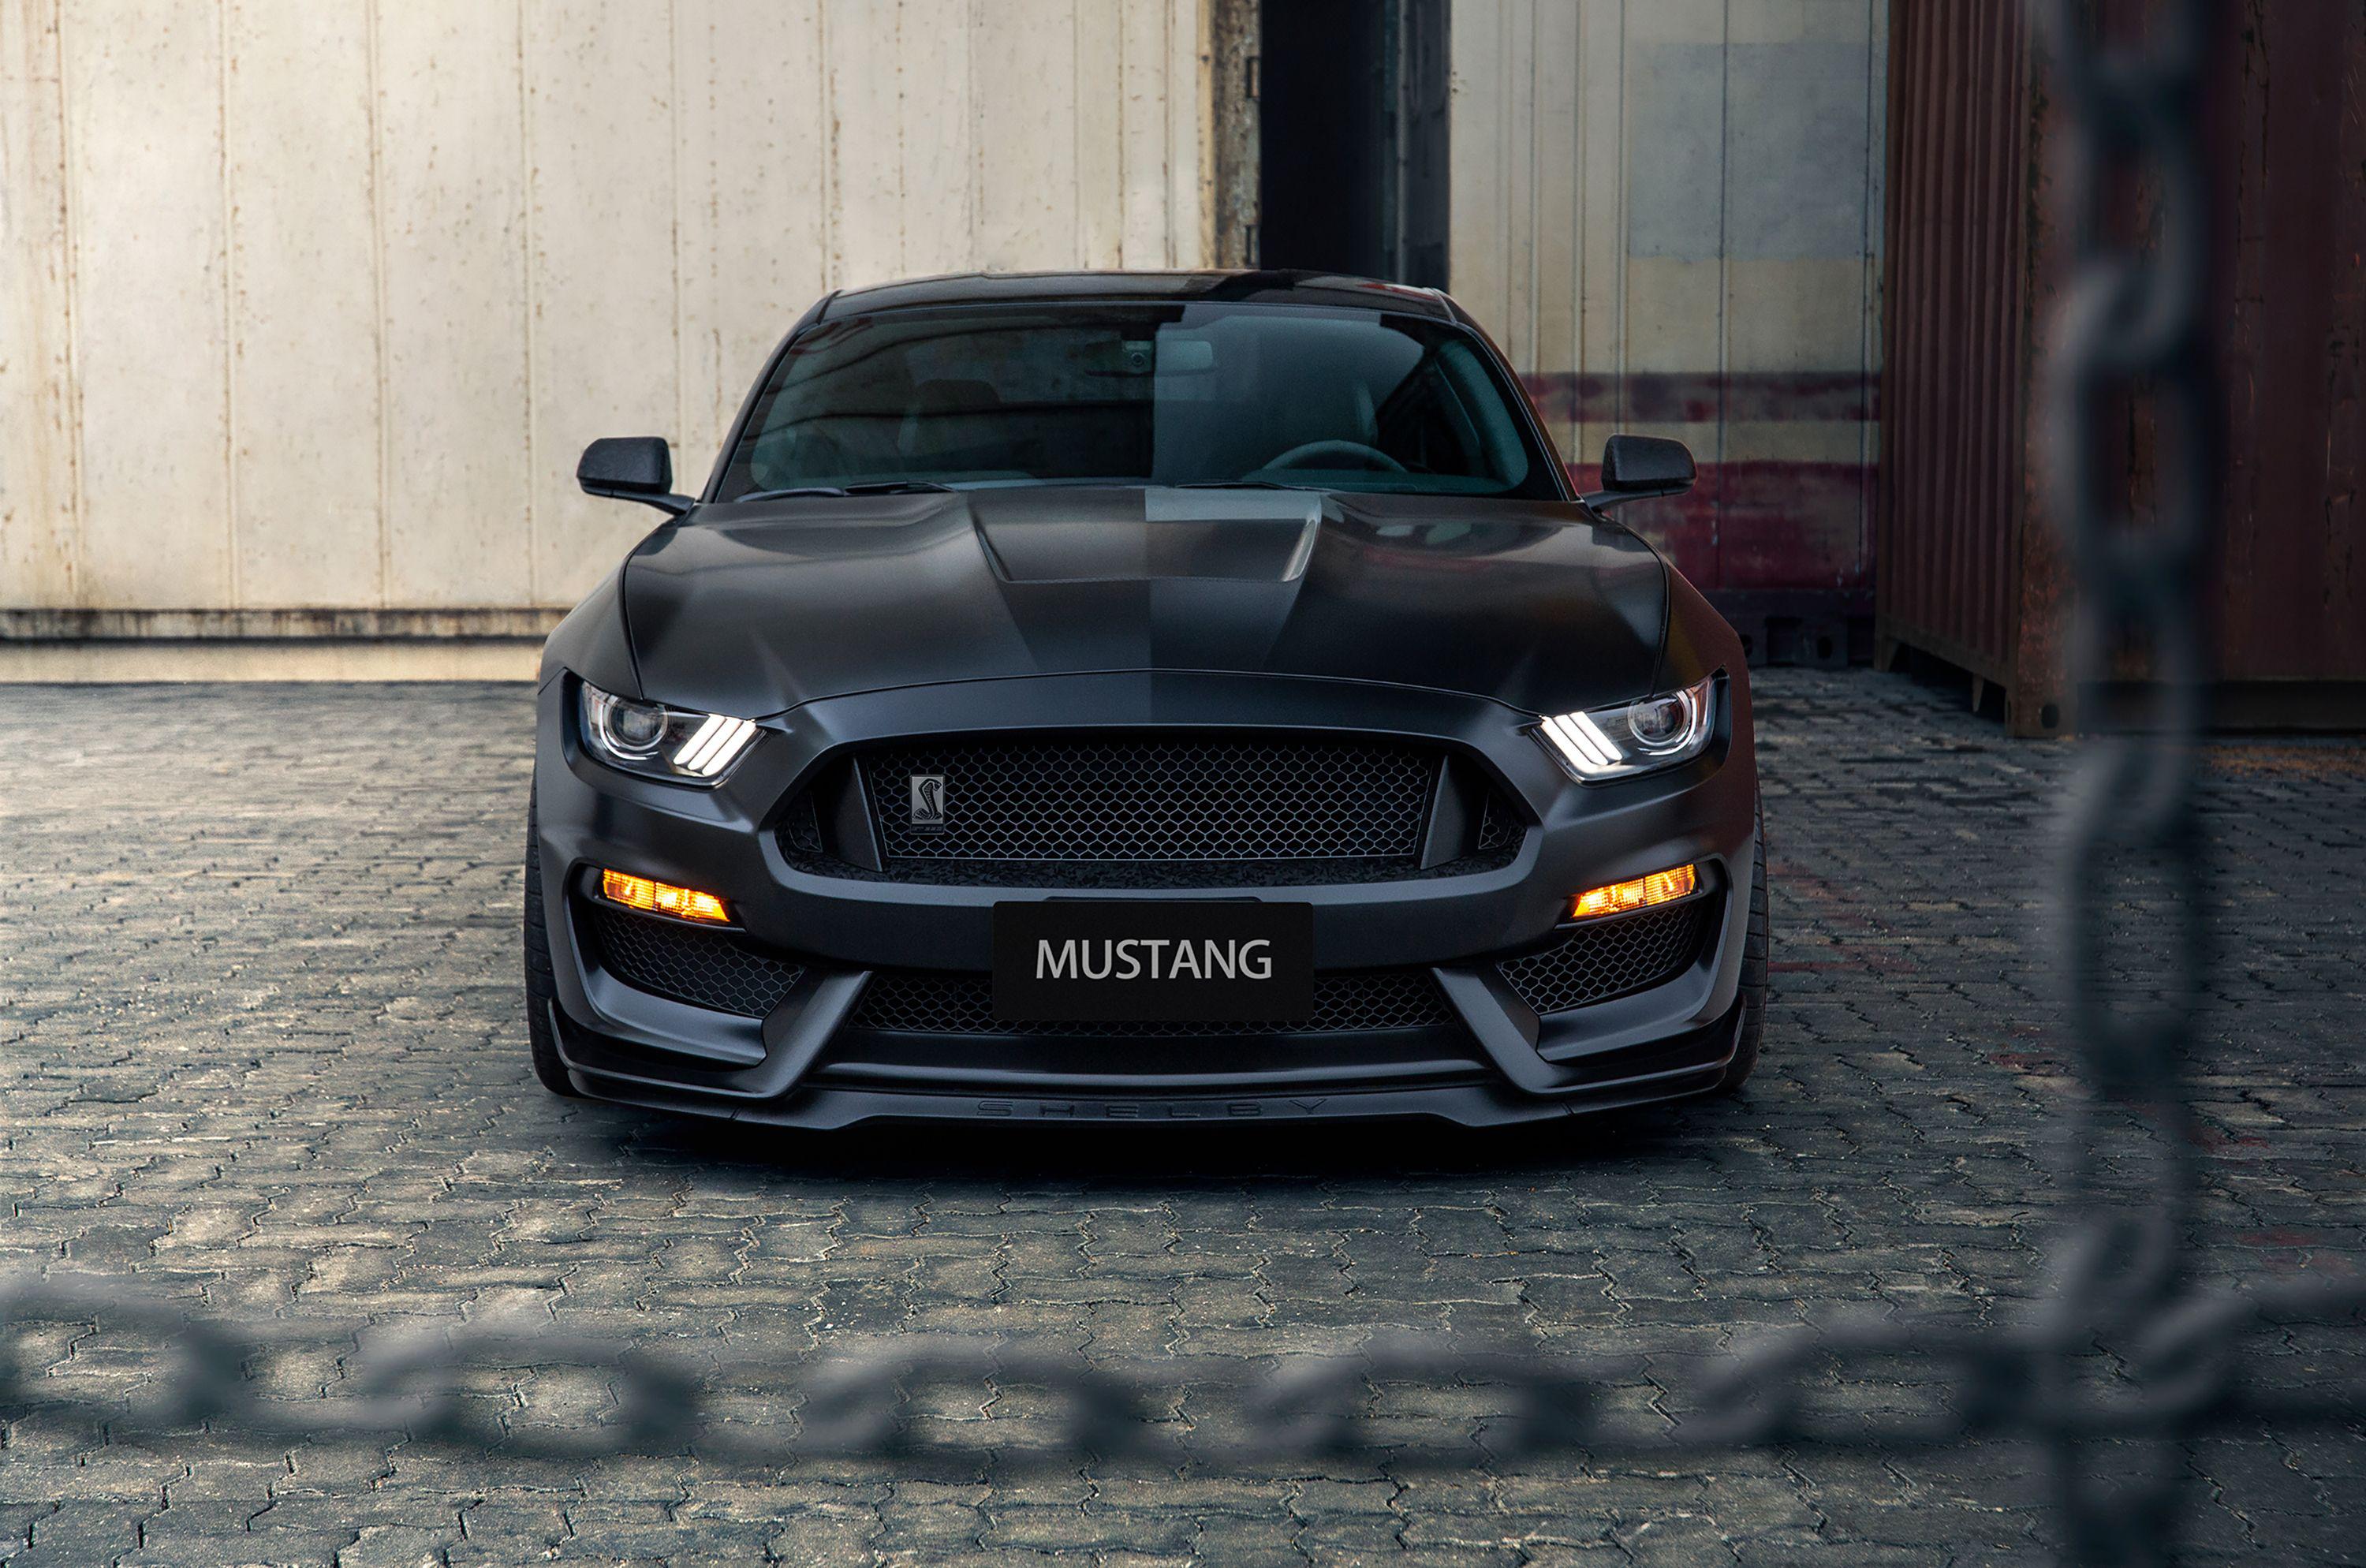 Ford Mustang Shelby Gt350